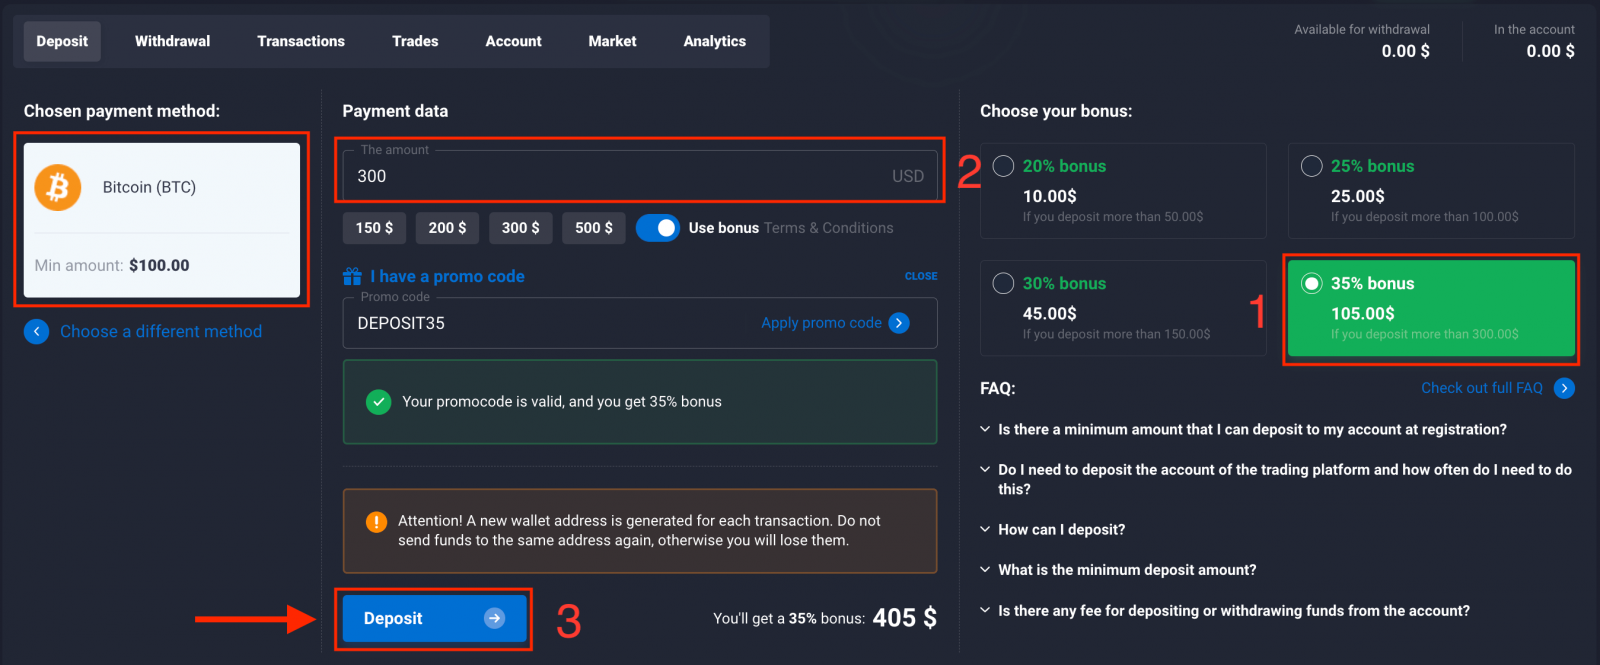 How to Open Account and Deposit Money into Quotex